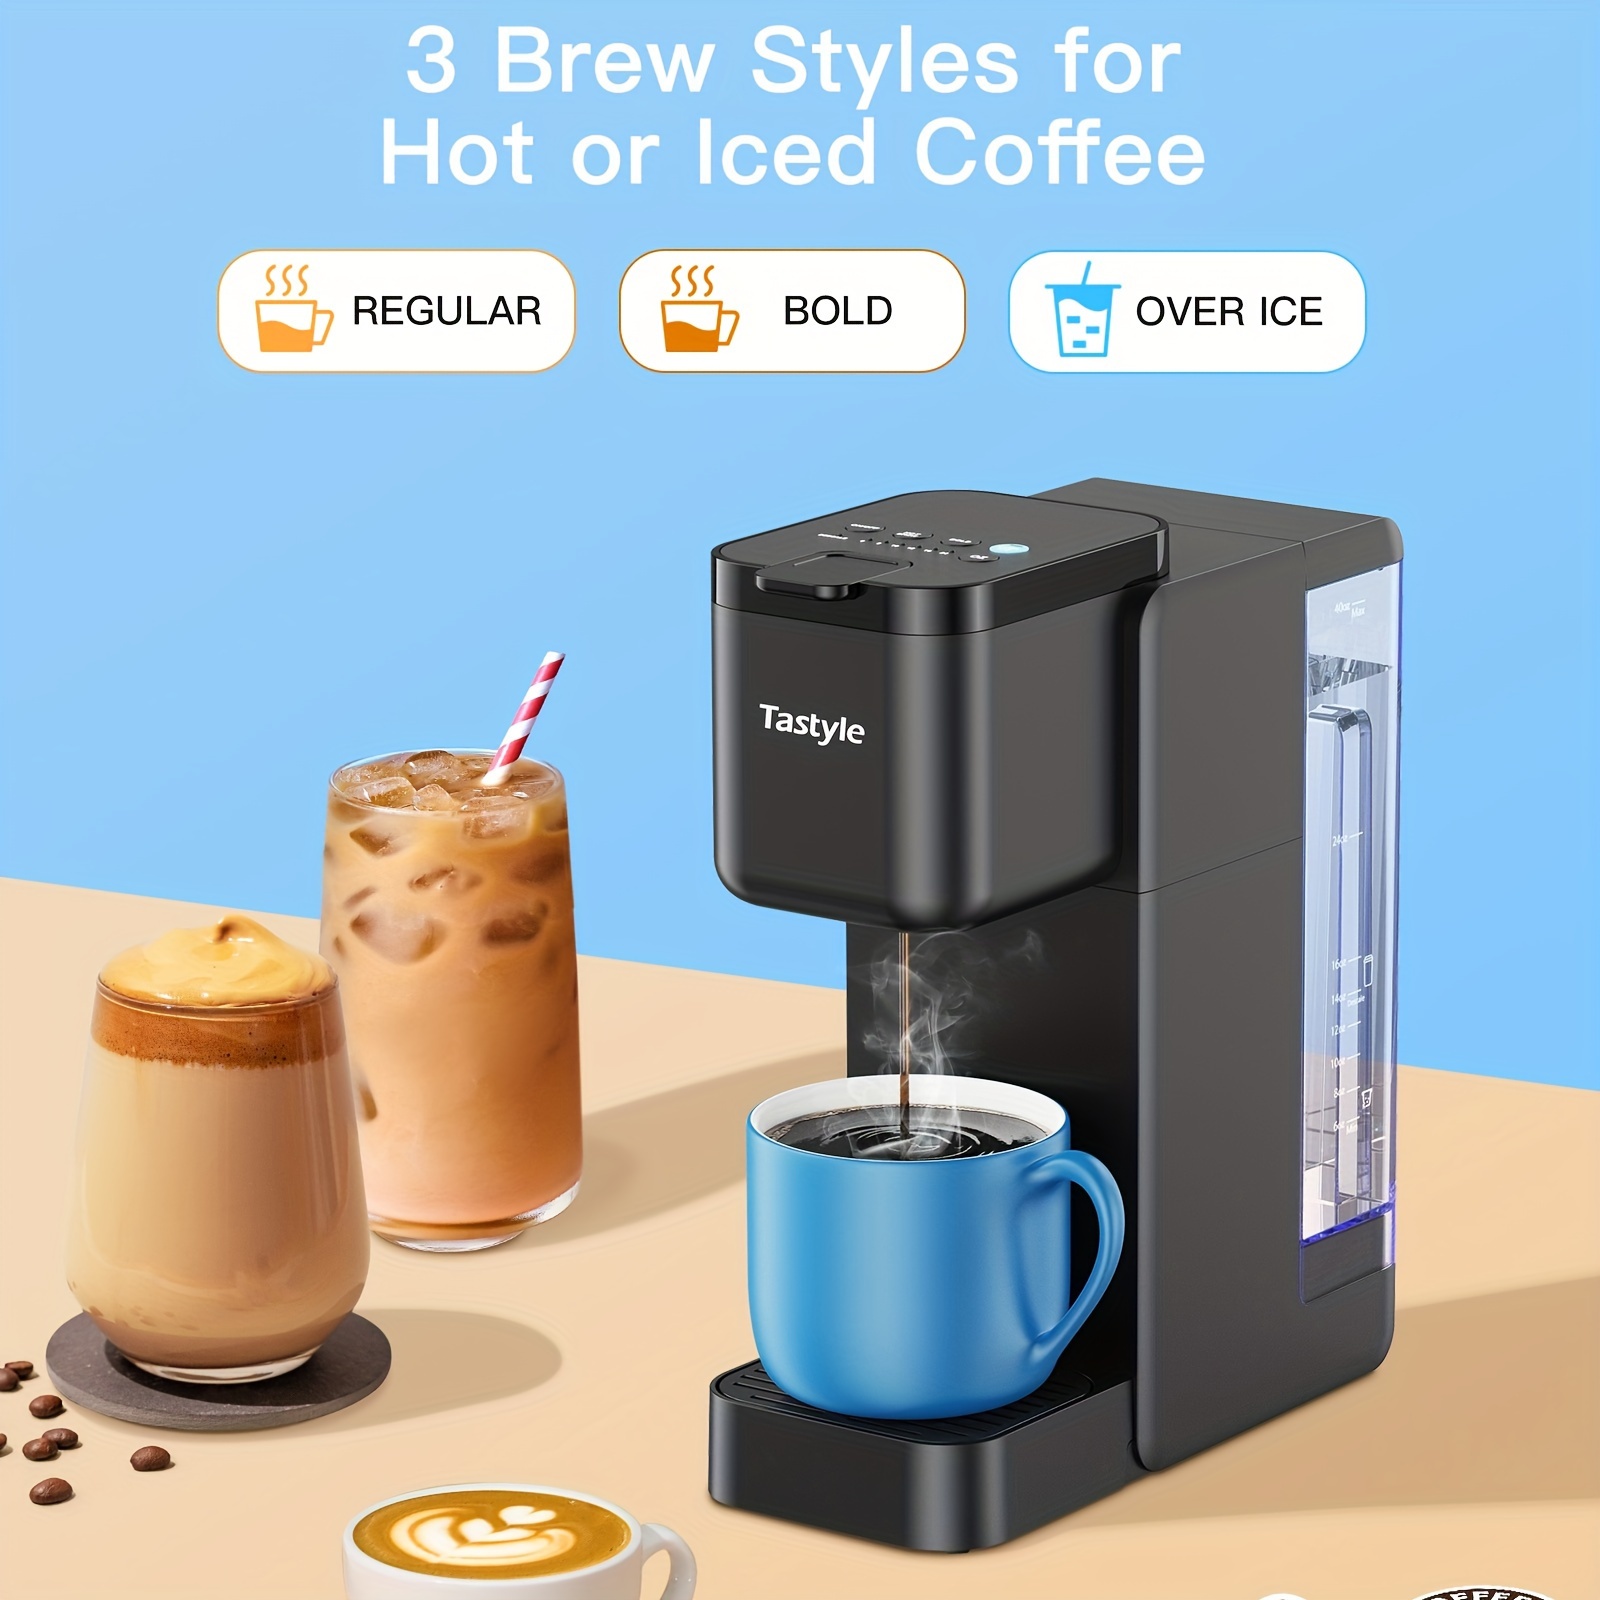 

Tastyle Single Serve Coffee Maker For K Cup & Ground Coffee, Hot And Iced Coffee Brewer With Removable 40 Oz. Water Reservoir, 6 To 24 Oz. Brew Sizes, Includes Bold & Settings, Black